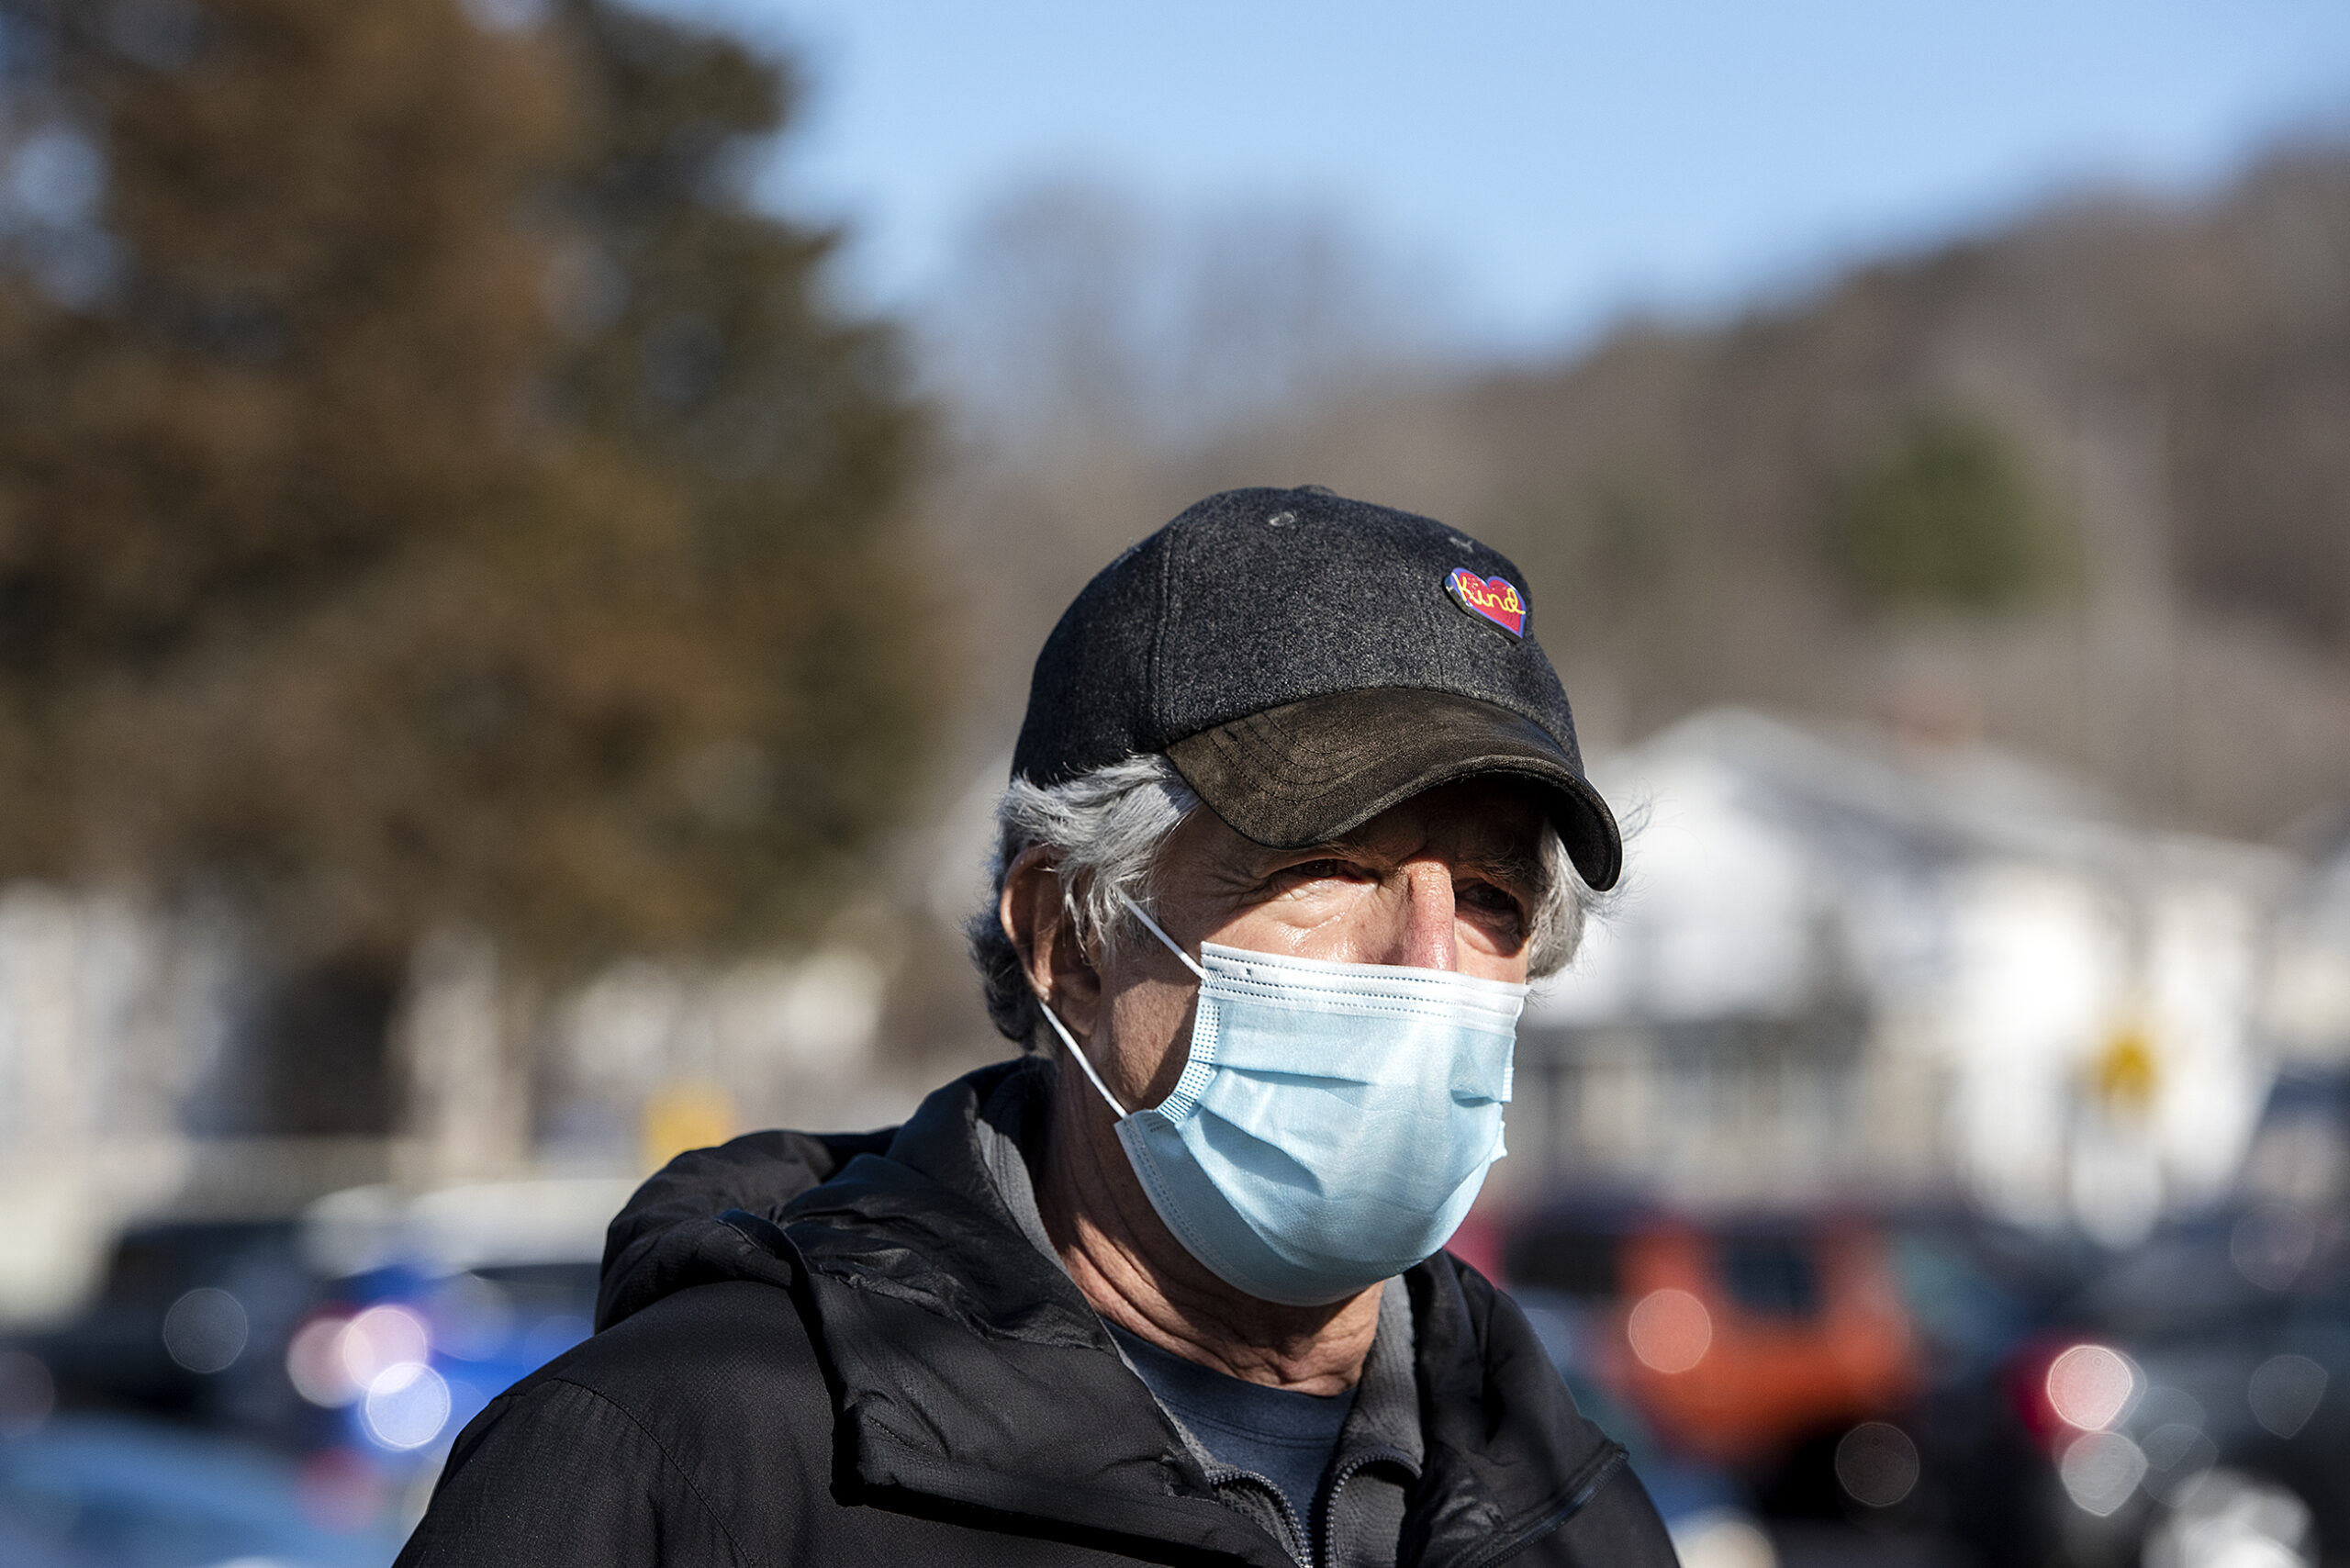 A man in a cap and face mask stands outside